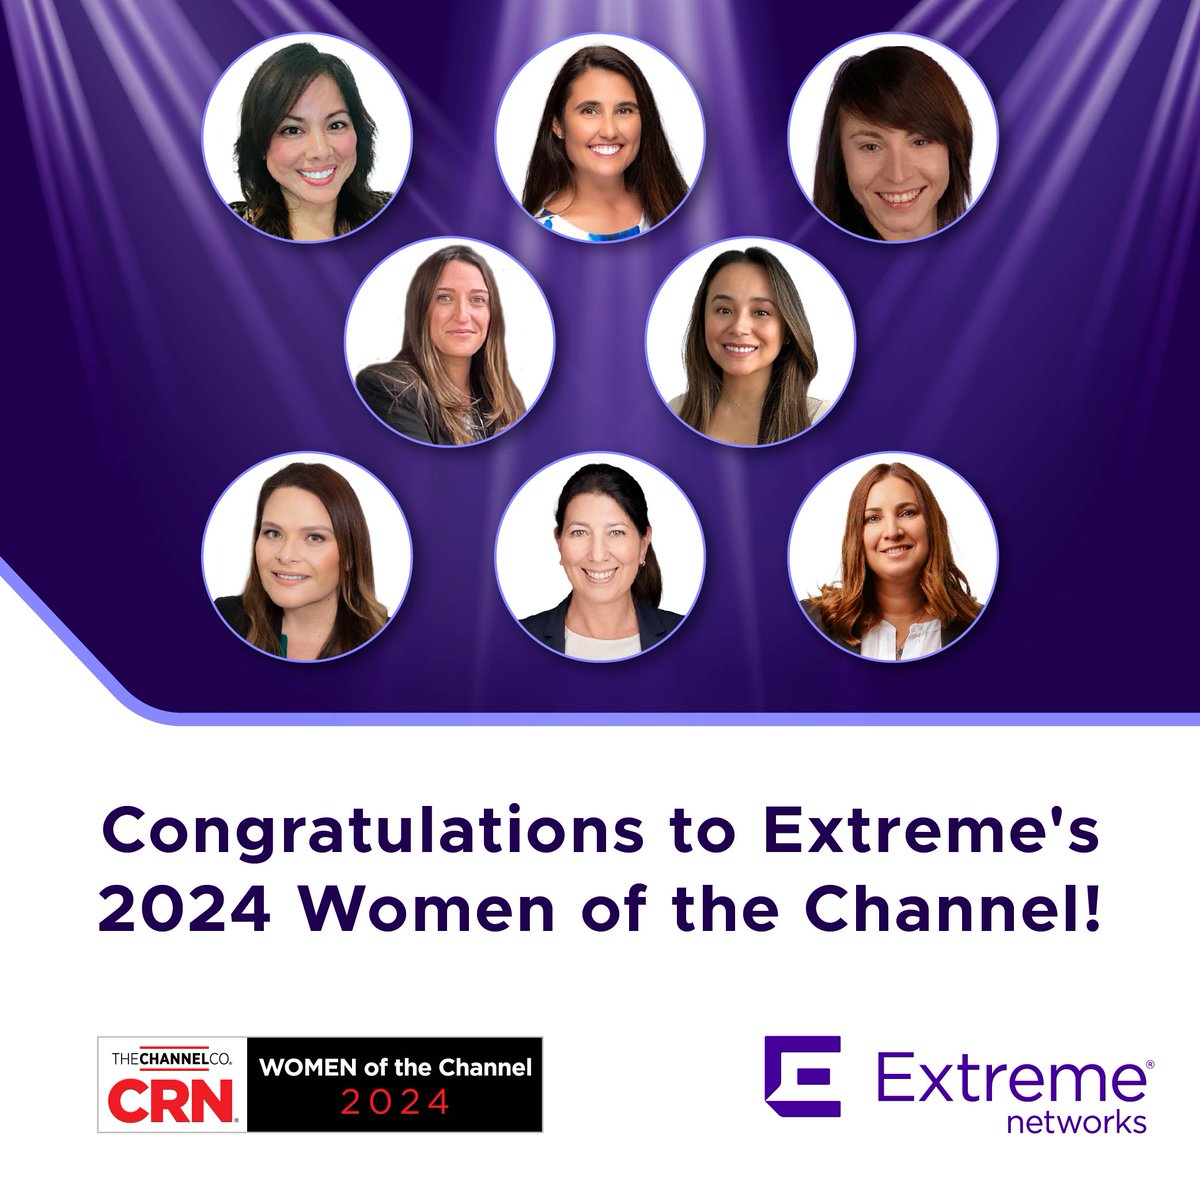 Congratulations to our 2024 Women of the Channel honorees! Kilynn, Jennifer, Natalia, Kate, SarahJane, Nancy, Lorna, and Jennifer are deeply committed to driving success, and it’s outstanding to see them recognized by CRN. Learn more: crn.com/rankings-and-l… #WOTC24 #WomenInTech